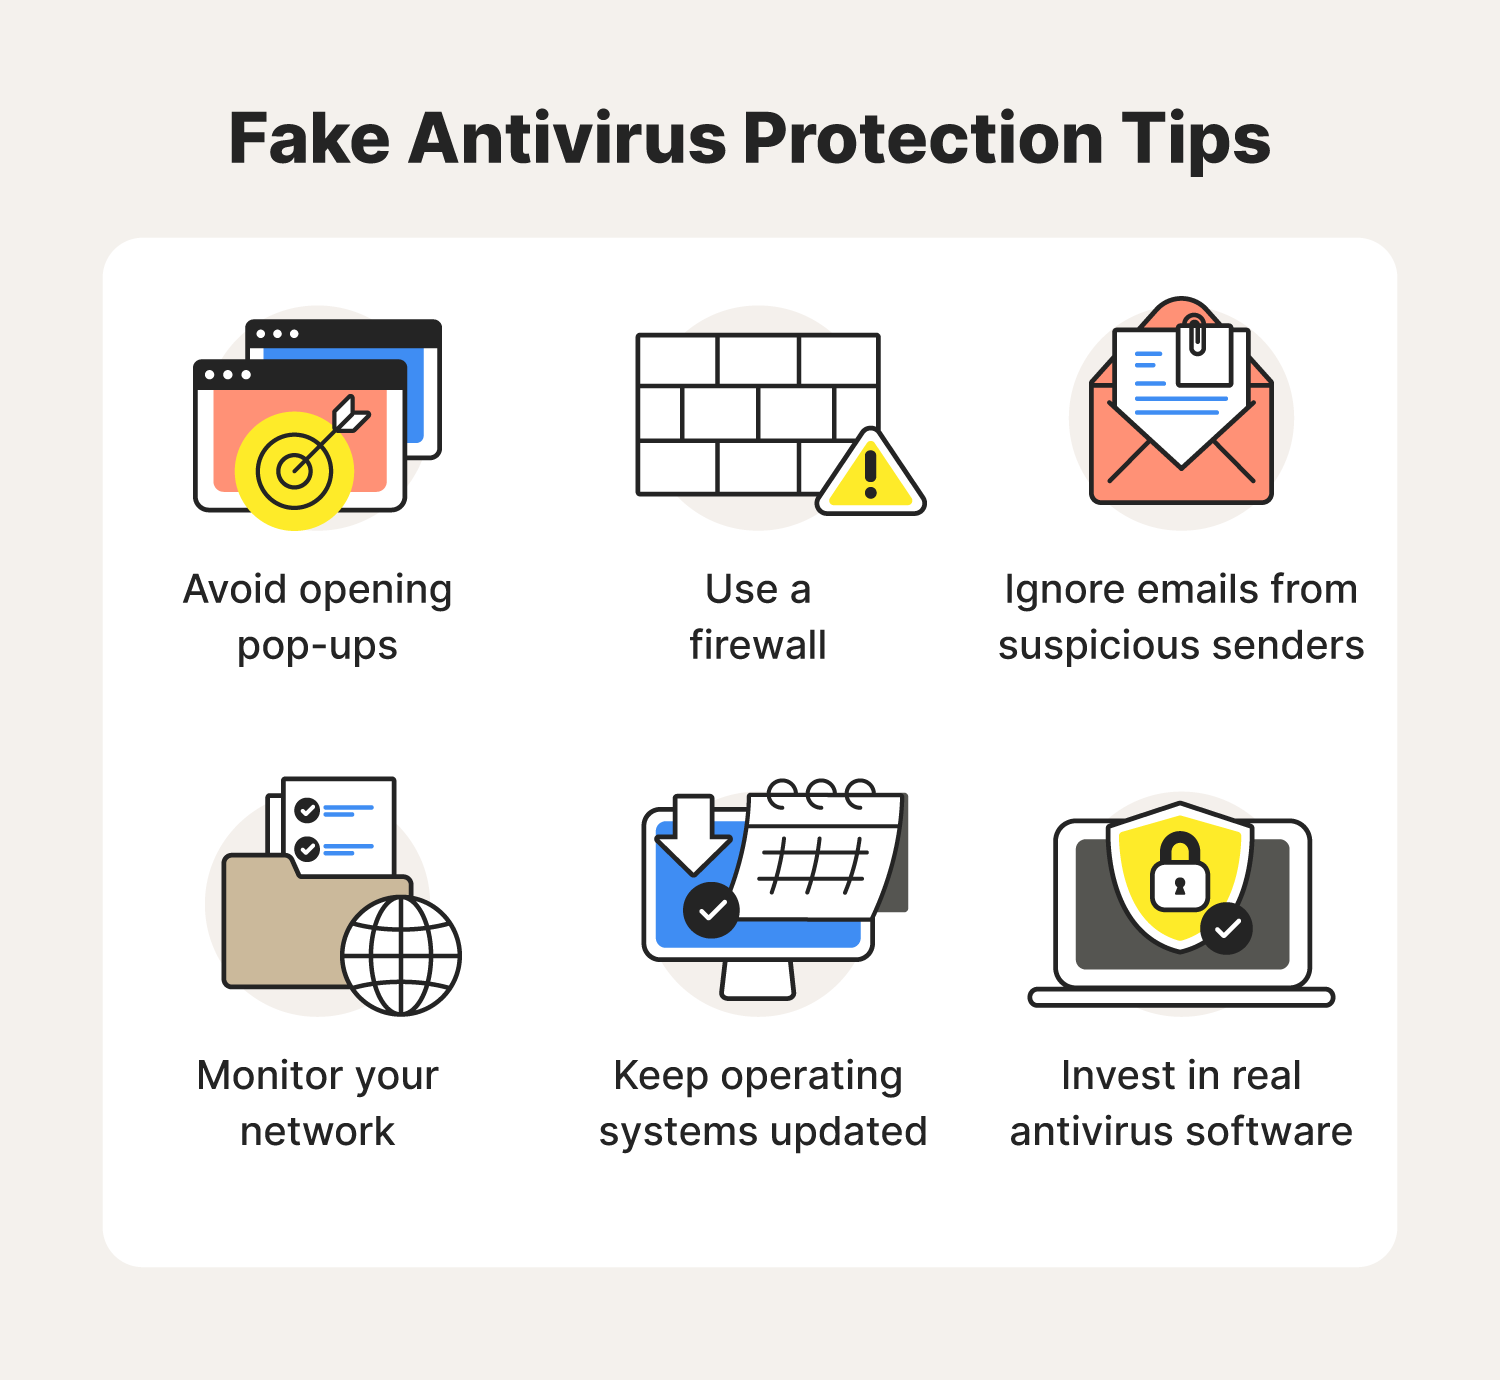 Six icons allude to helpful fake antivirus protection tips, informing you how to avoid fake antivirus software.